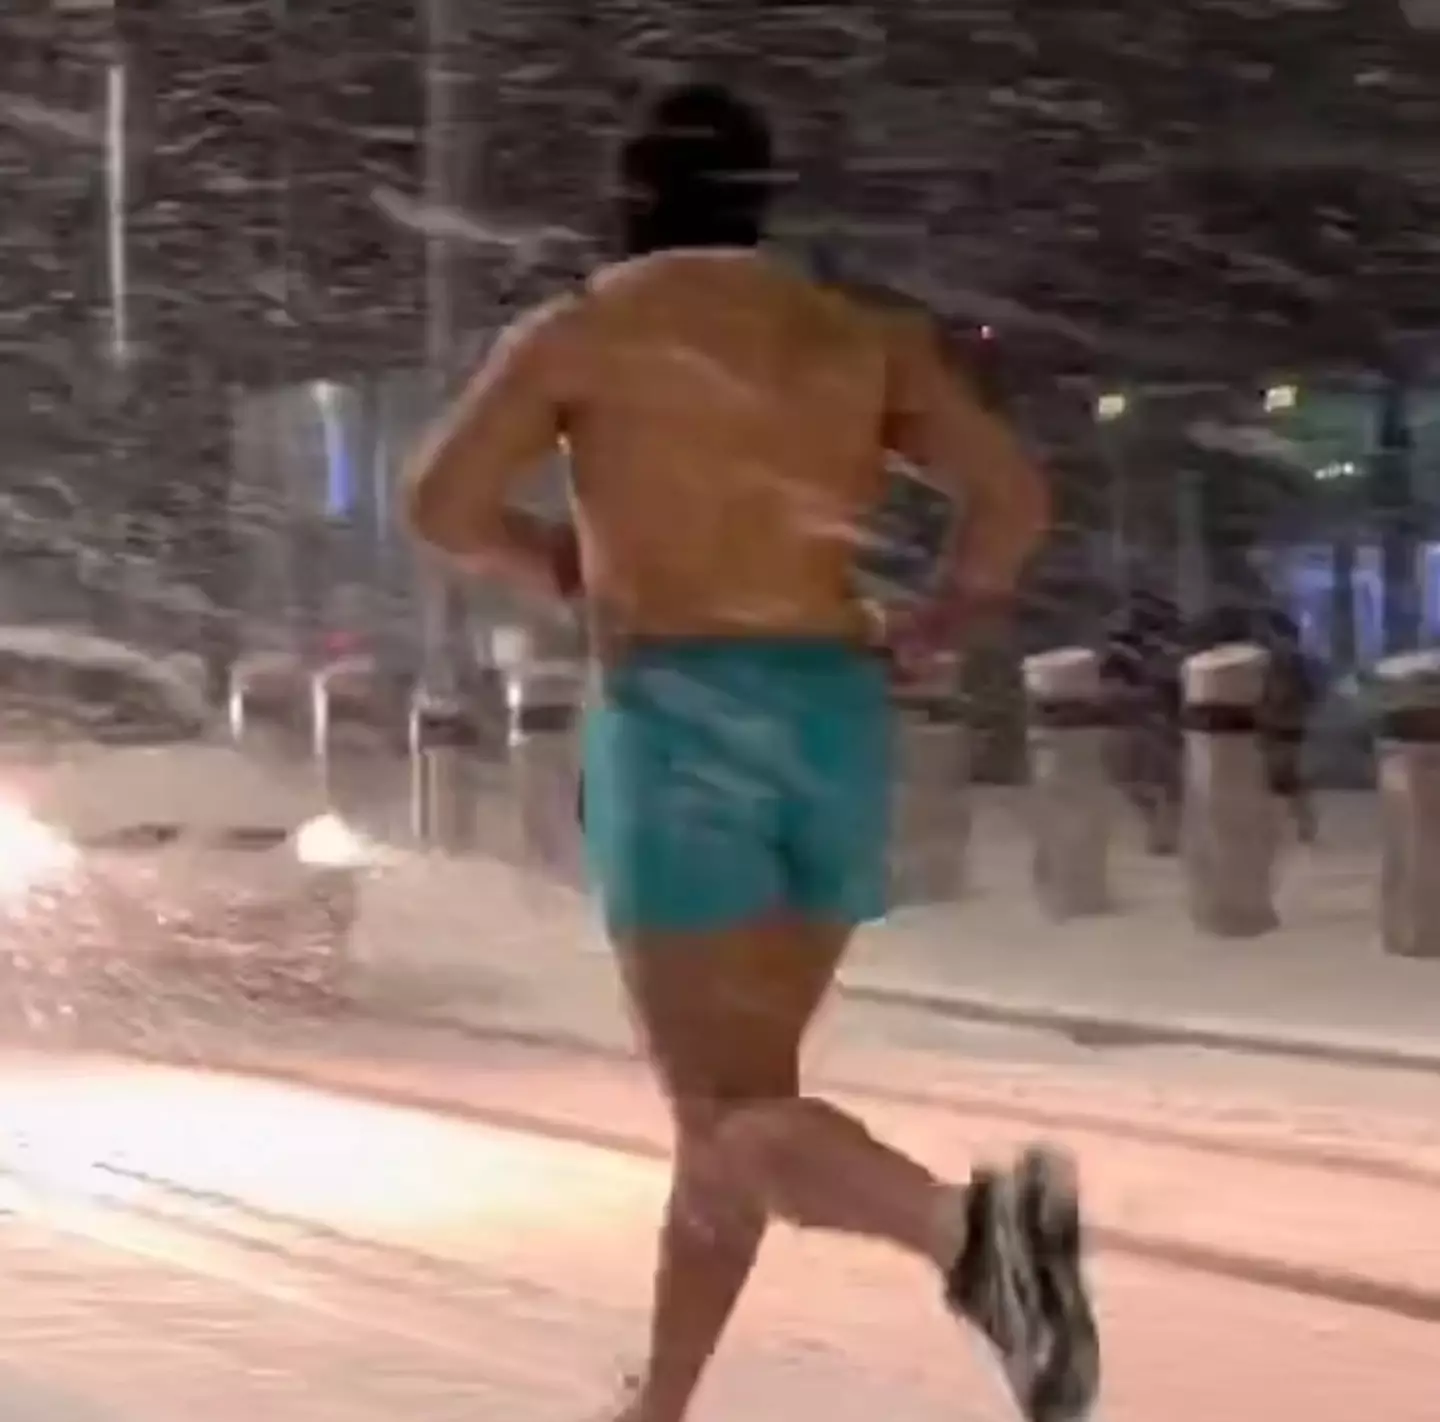 People were confused when they spotted the man running in the blizzard.